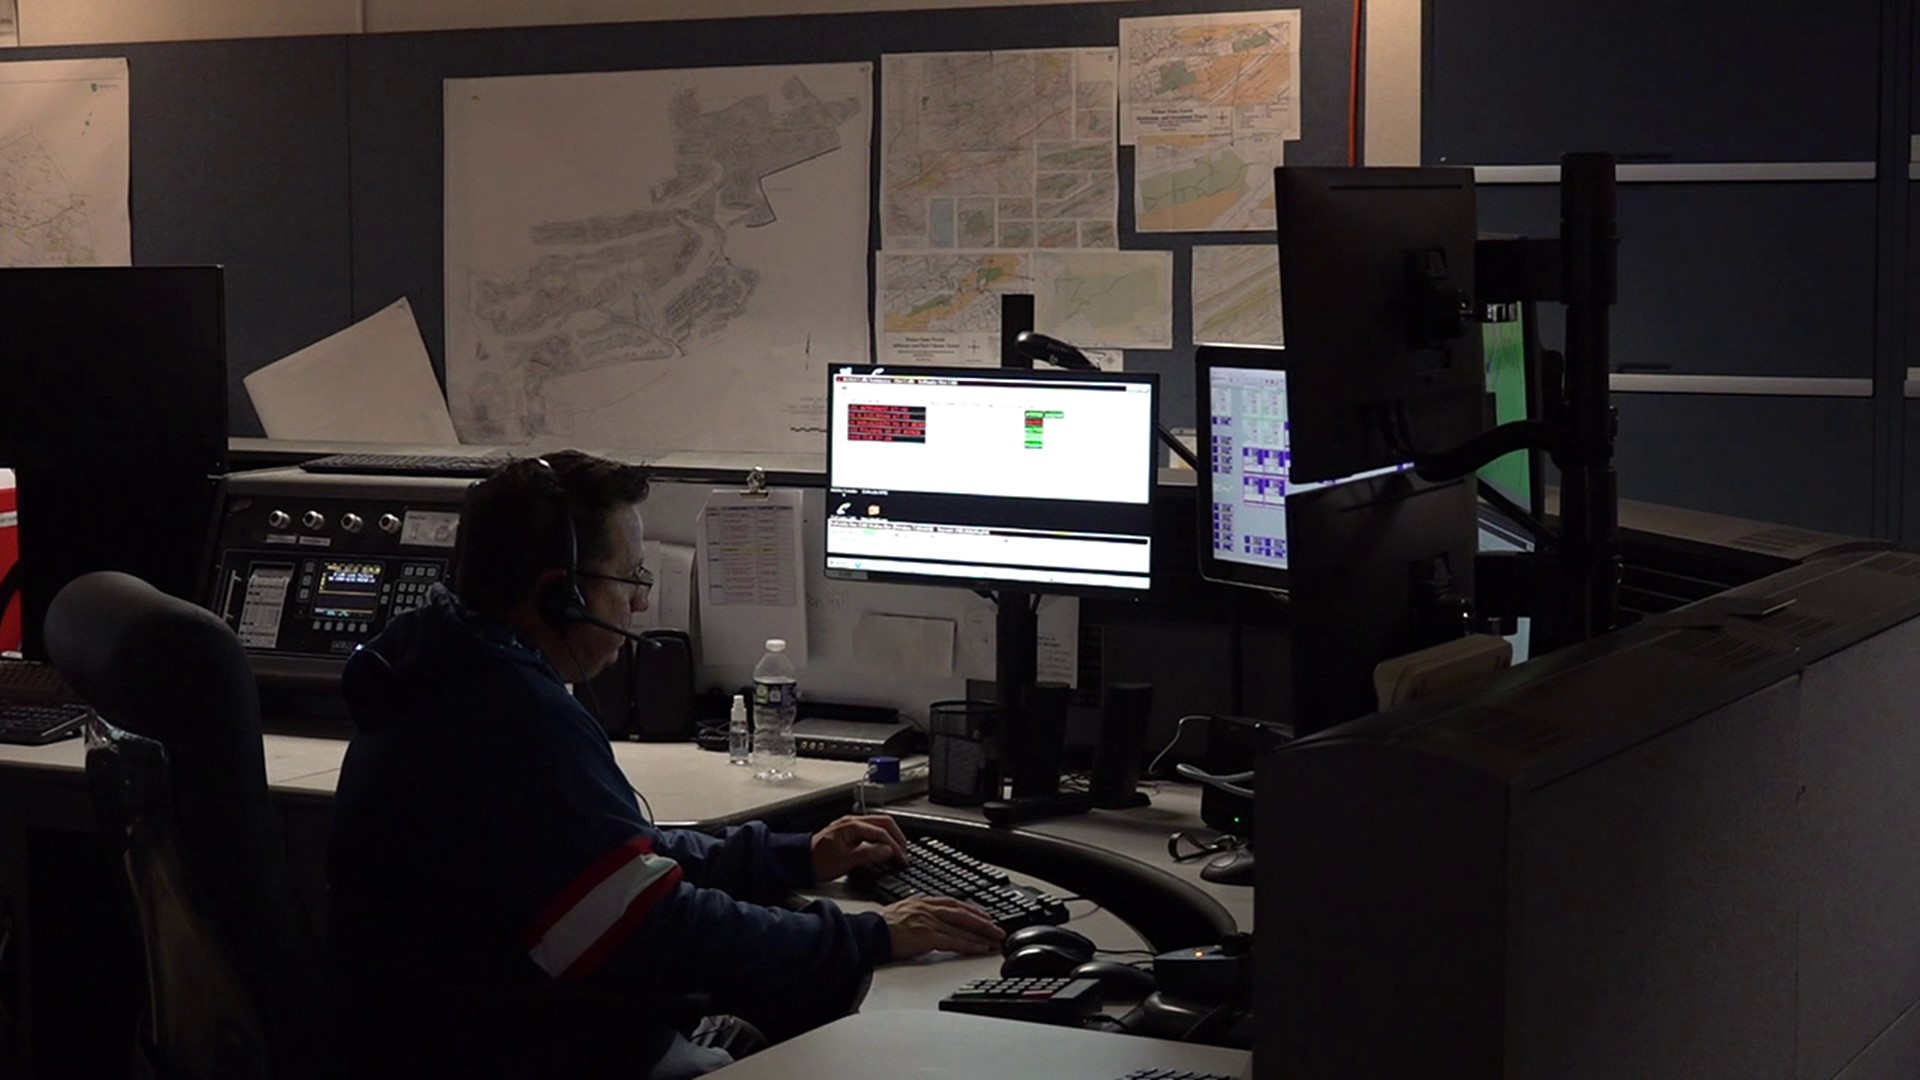 911 call centers all over our area are struggling to find people to help answer emergency calls.